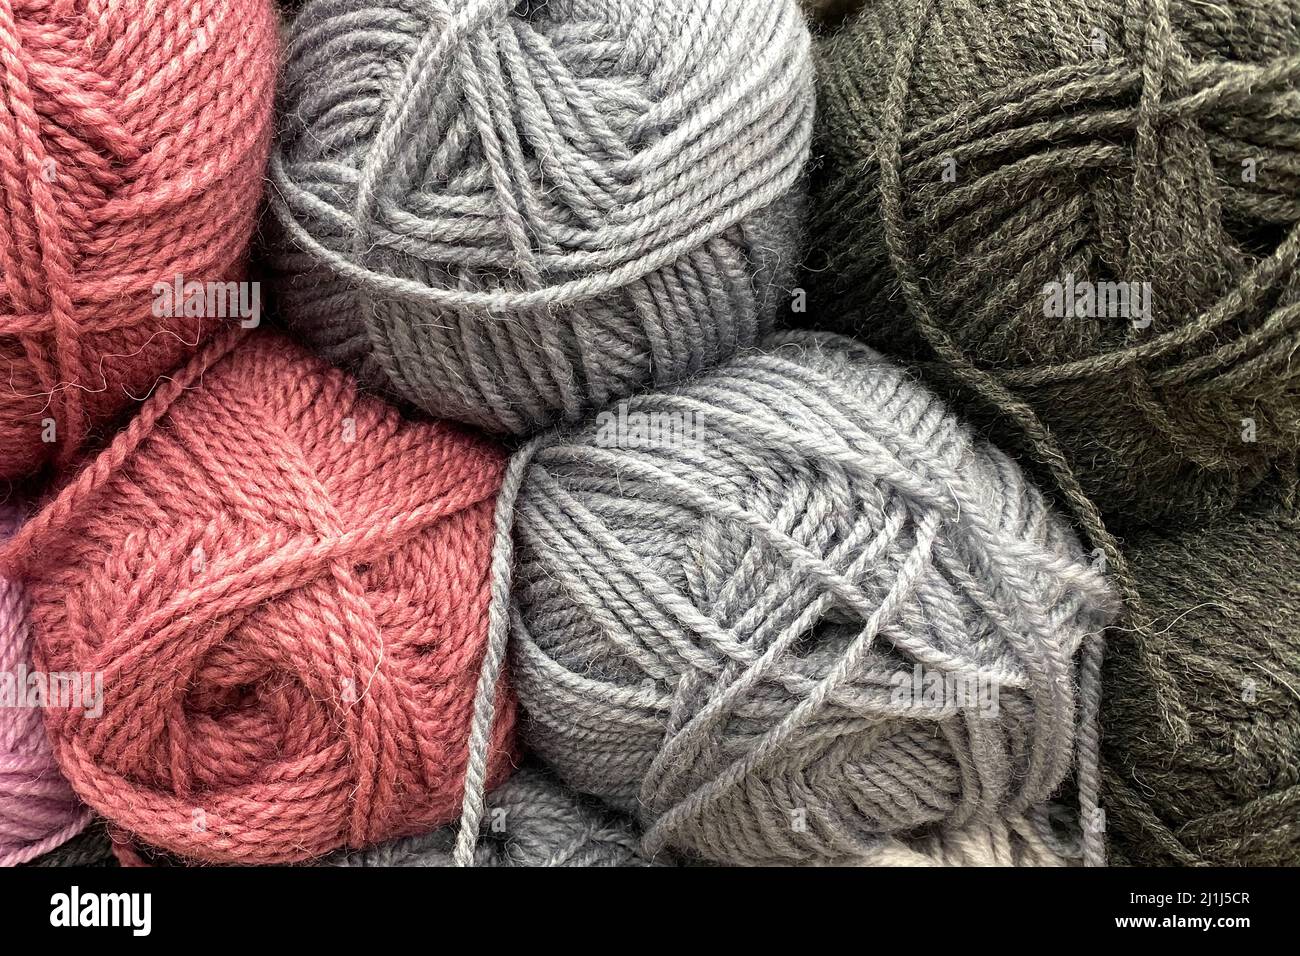 Yarn in skeins. Wool yarn of gray and pink colors lies tightly next to each other Stock Photo